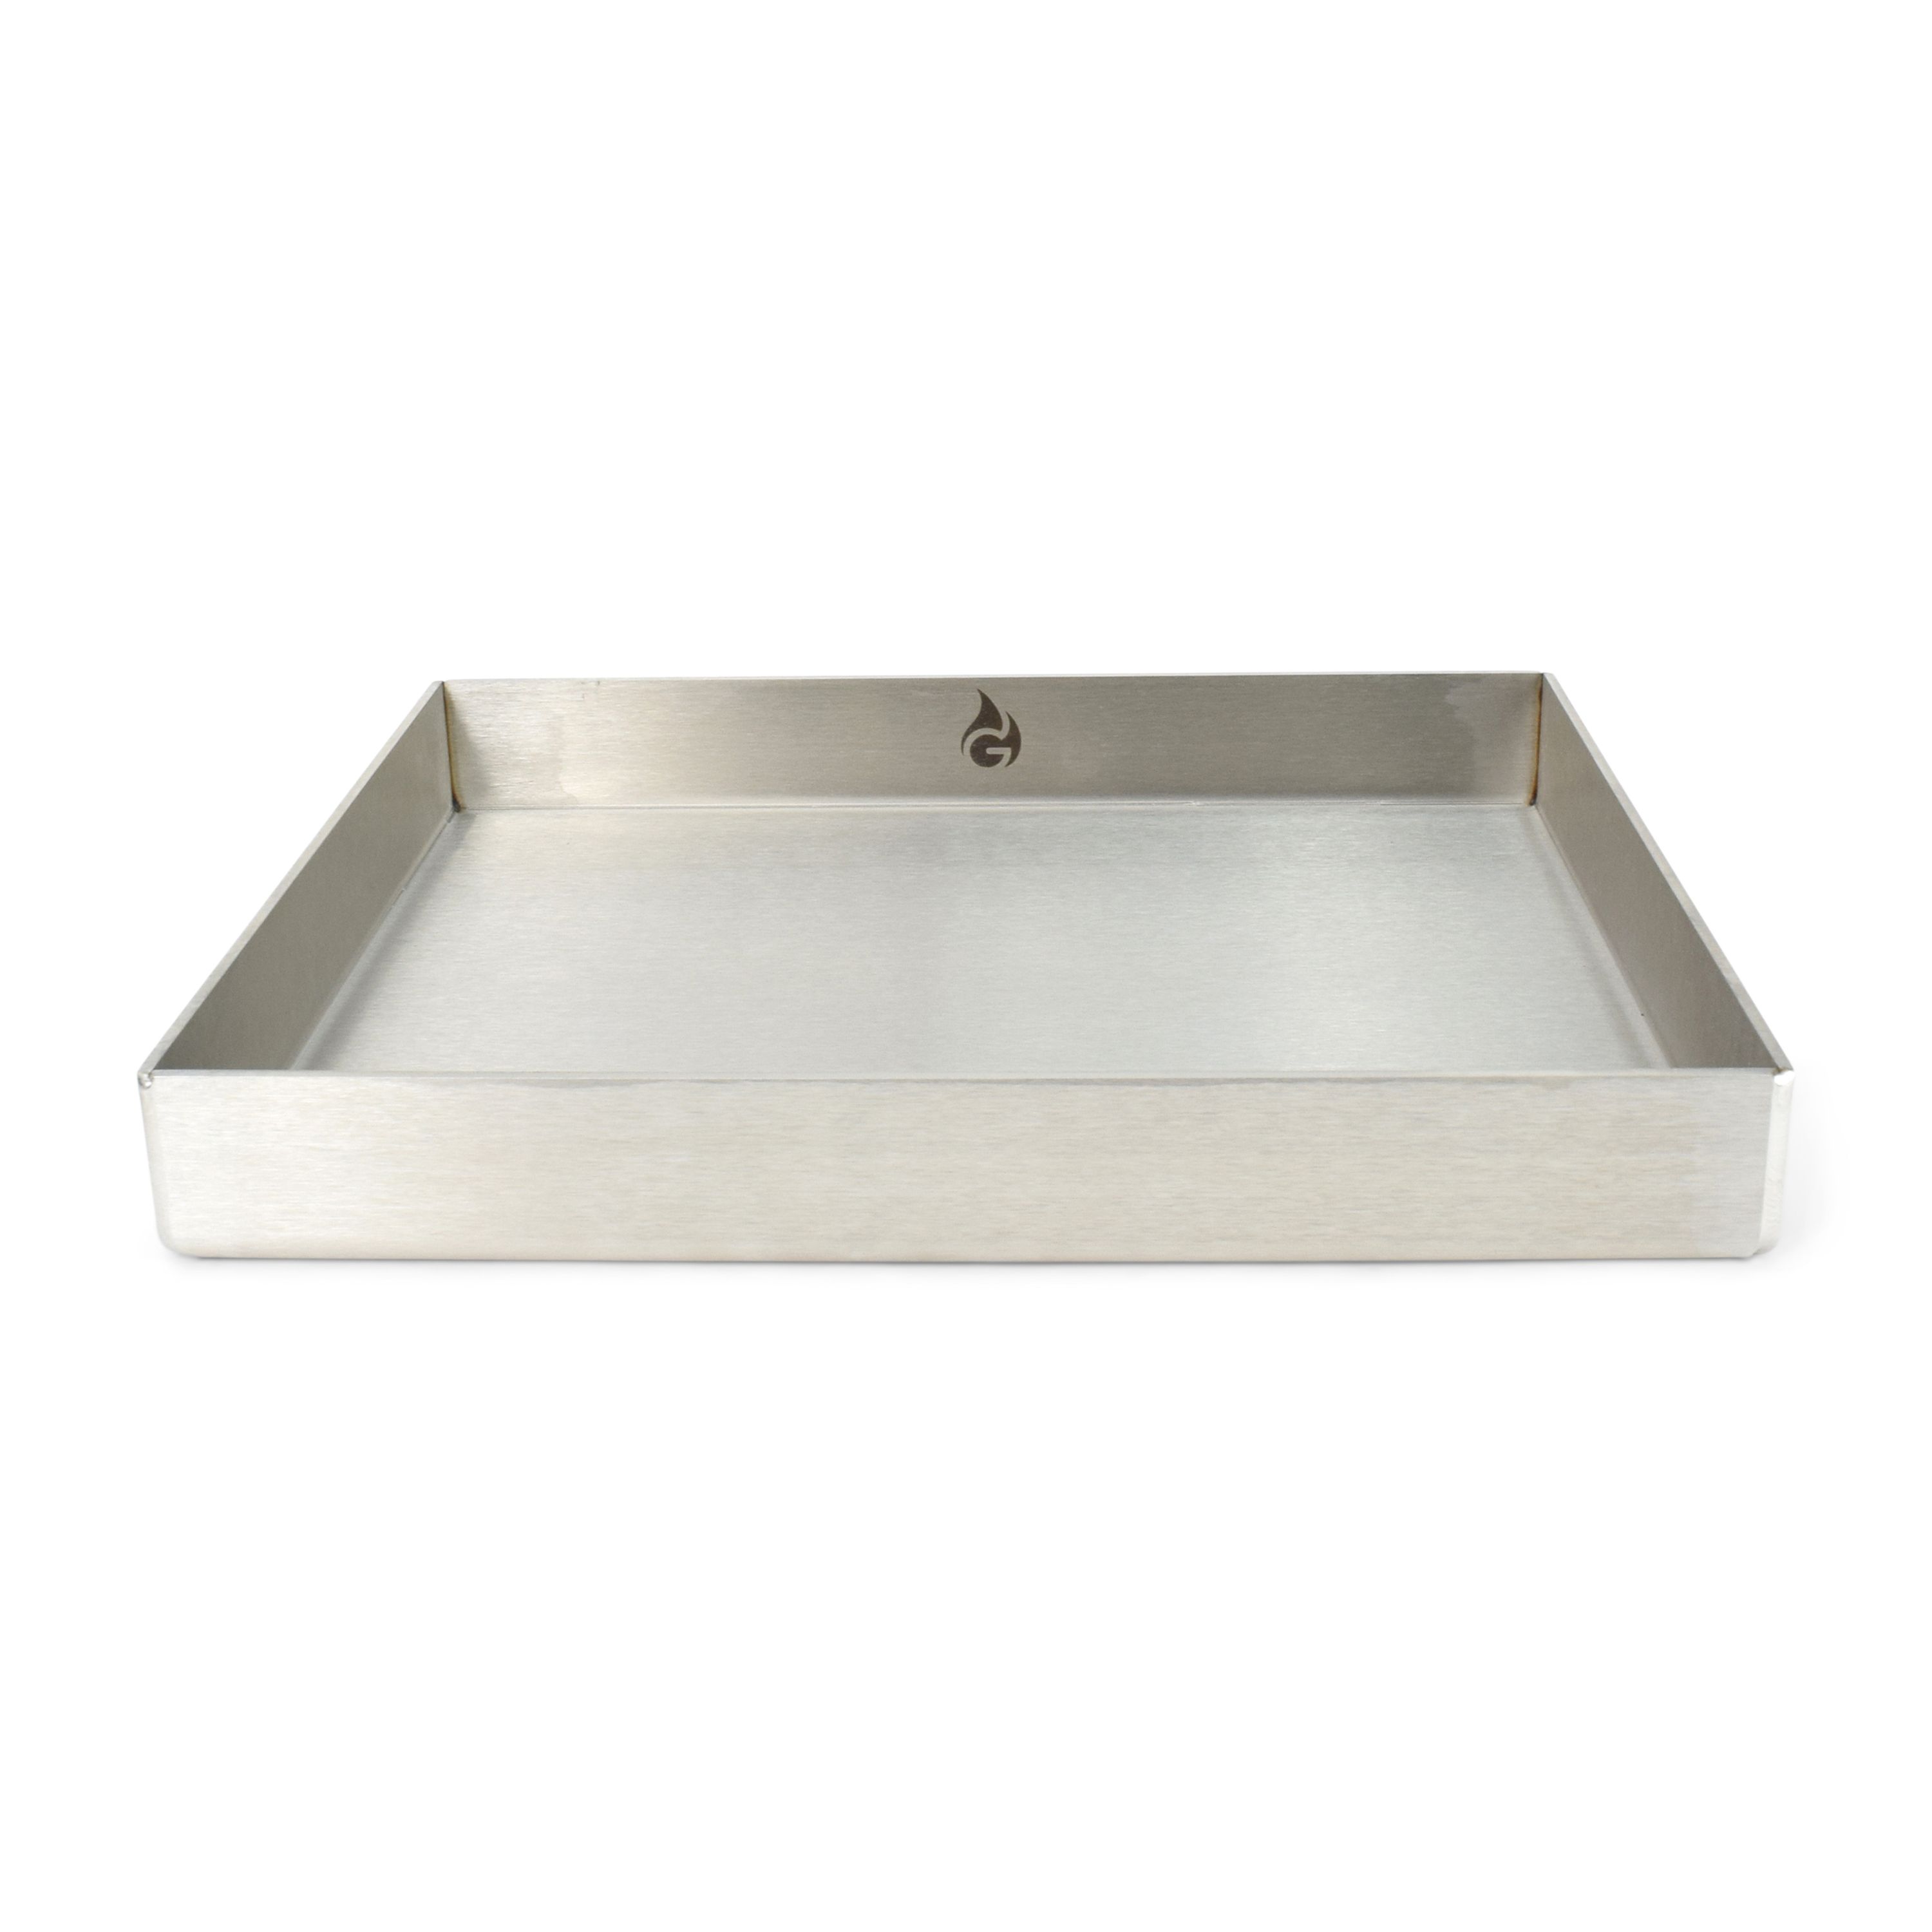 Stainless Steel Grill Plate - Plancha 30 x 25cm Closed grill tray - tightly welded